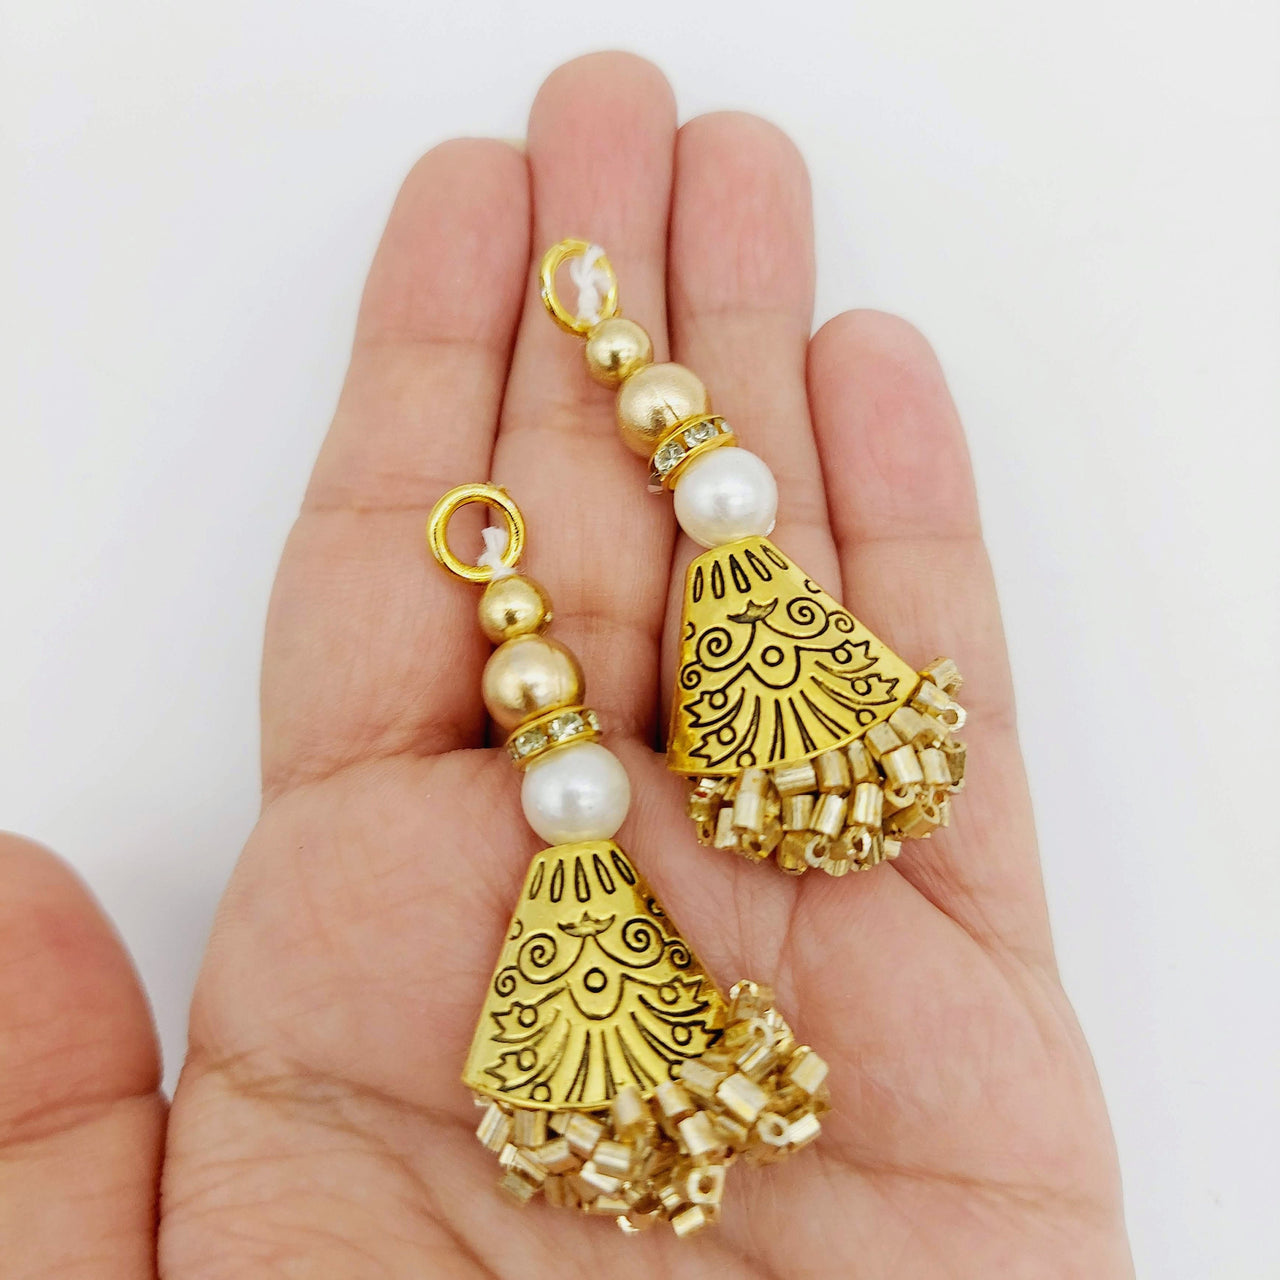 Gold Engraved Flatback Charm Latkan With Beaded Tassels And Pearl Embellishments, Indian Latkans, Gold Beaded Danglers